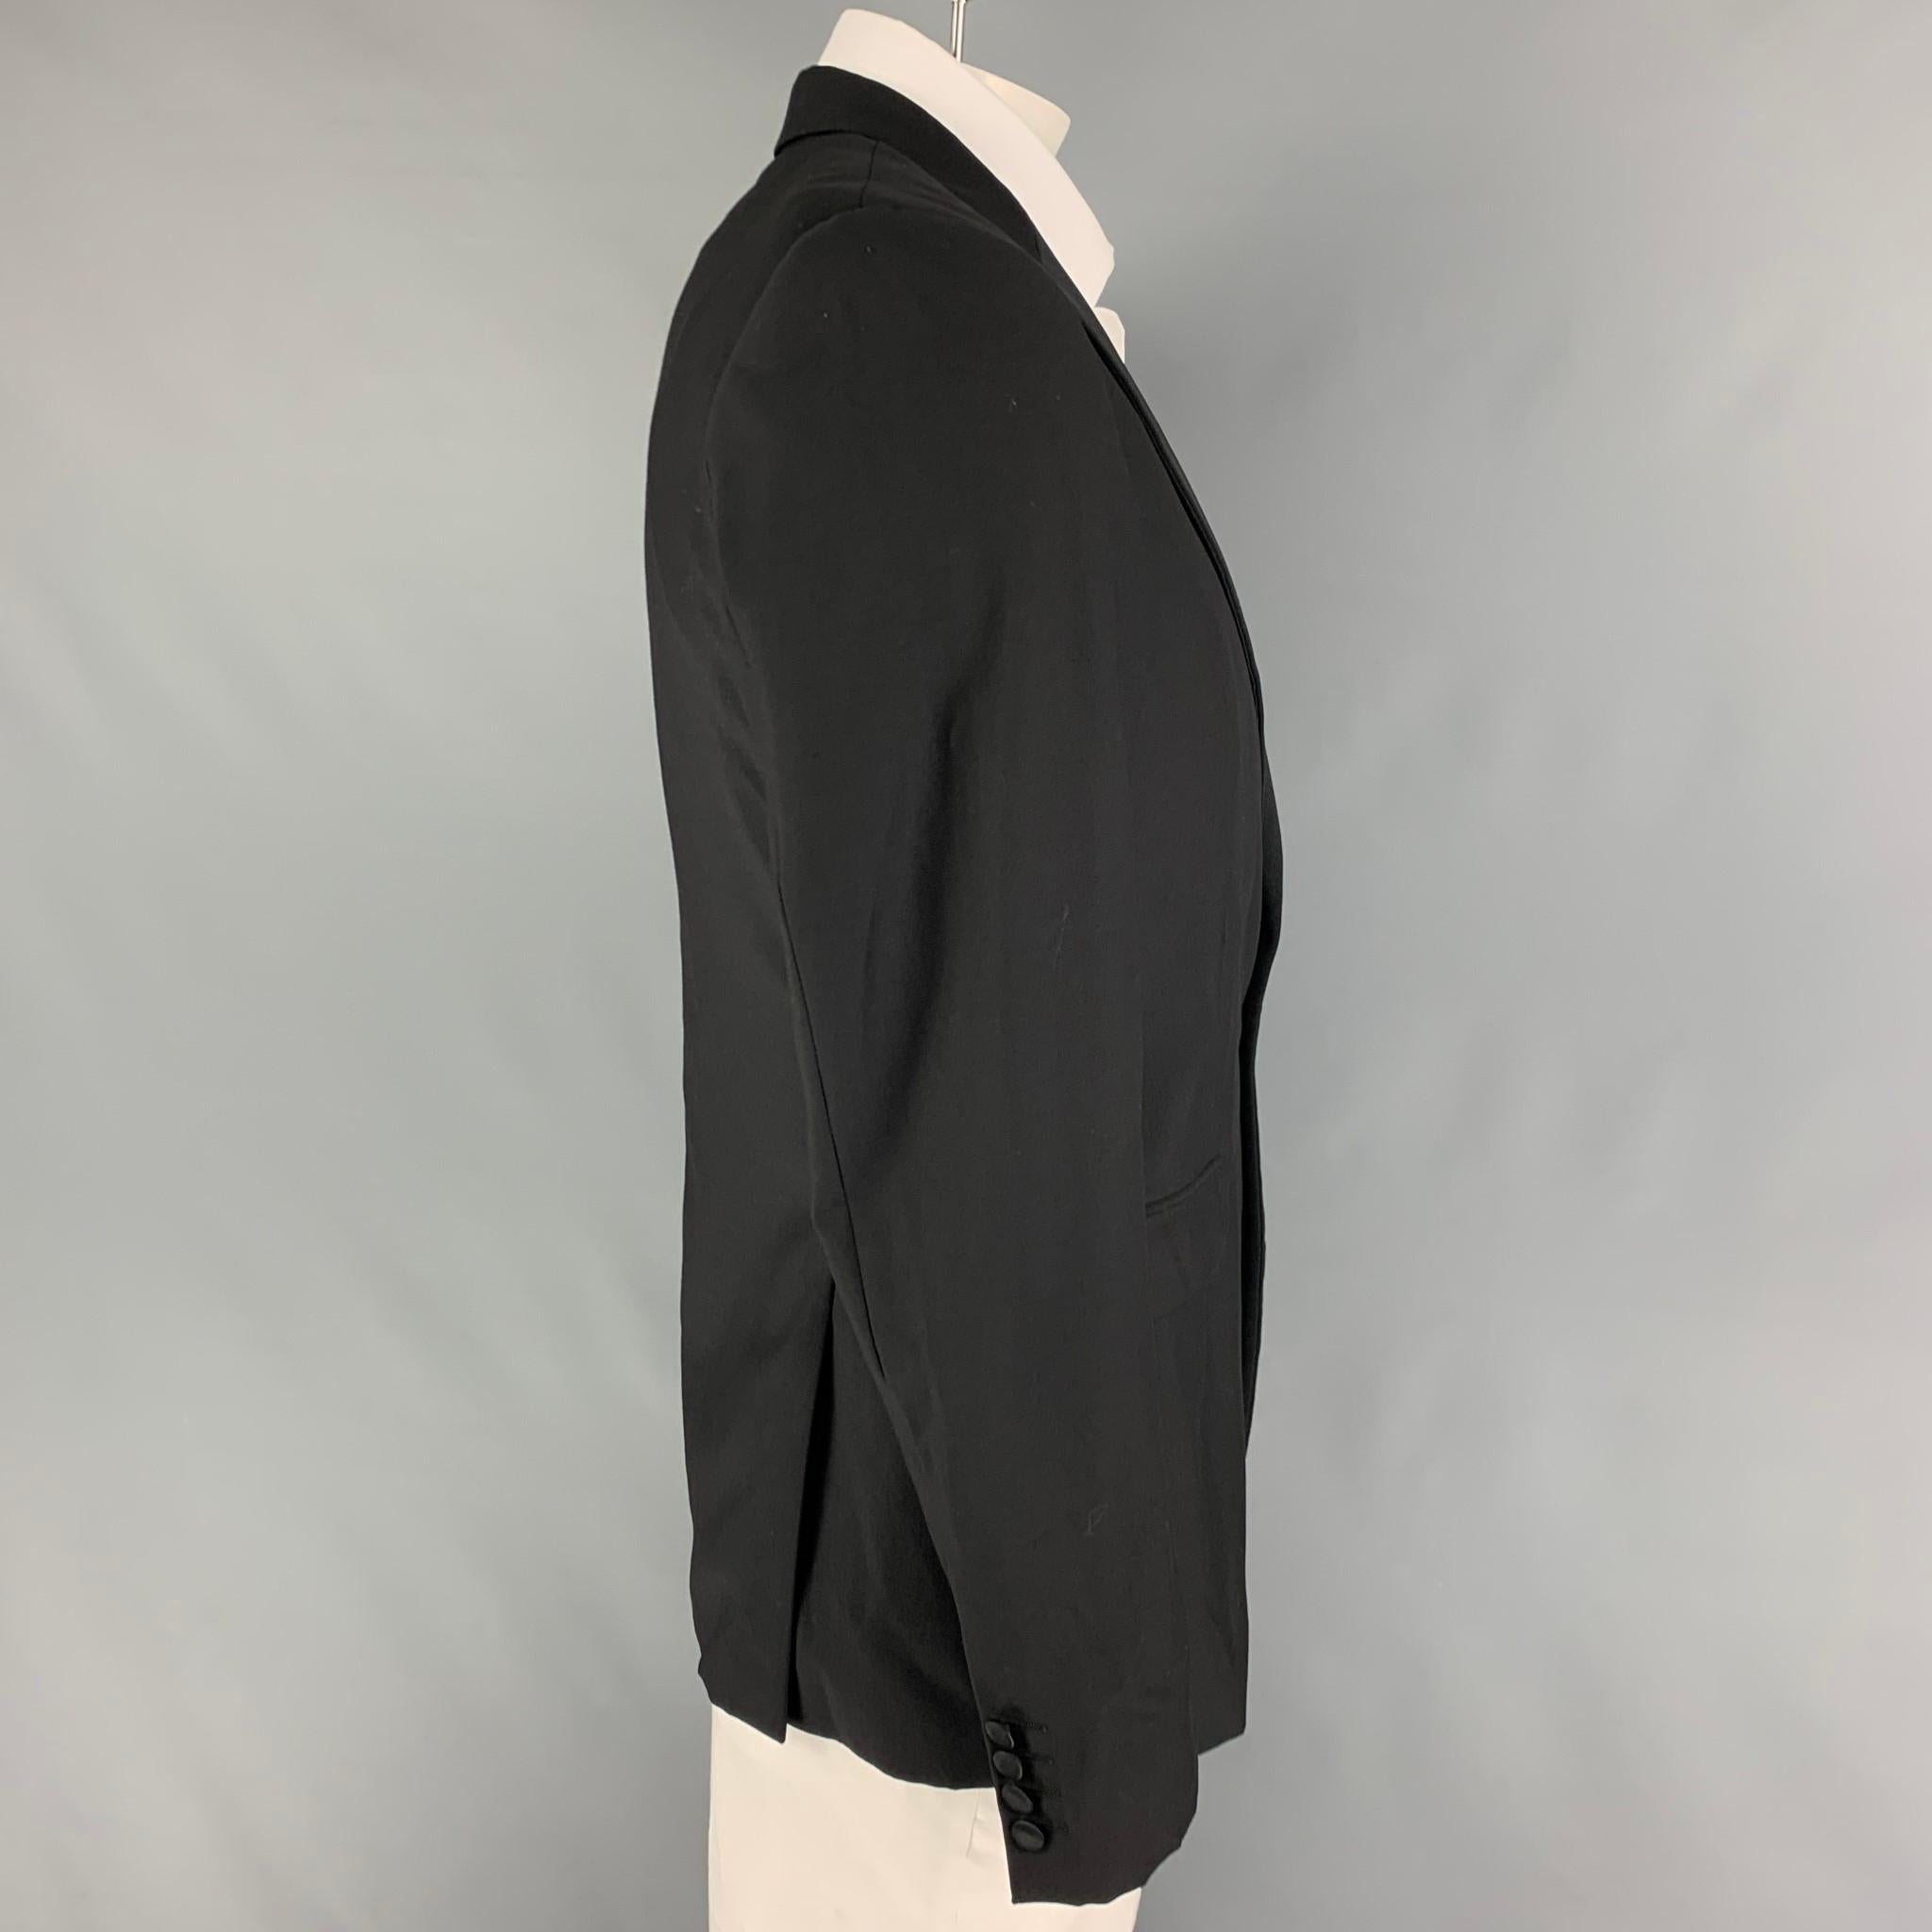 CALVIN KLEIN COLLECTION sport coat comes in a black wool with a full liner featuring a peak lapel, flap pockets, double back vent, and a single button closure. 

Very Good Pre-Owned Condition.
Marked: 50/40

Measurements:

Shoulder: 18 in.
Chest: 40